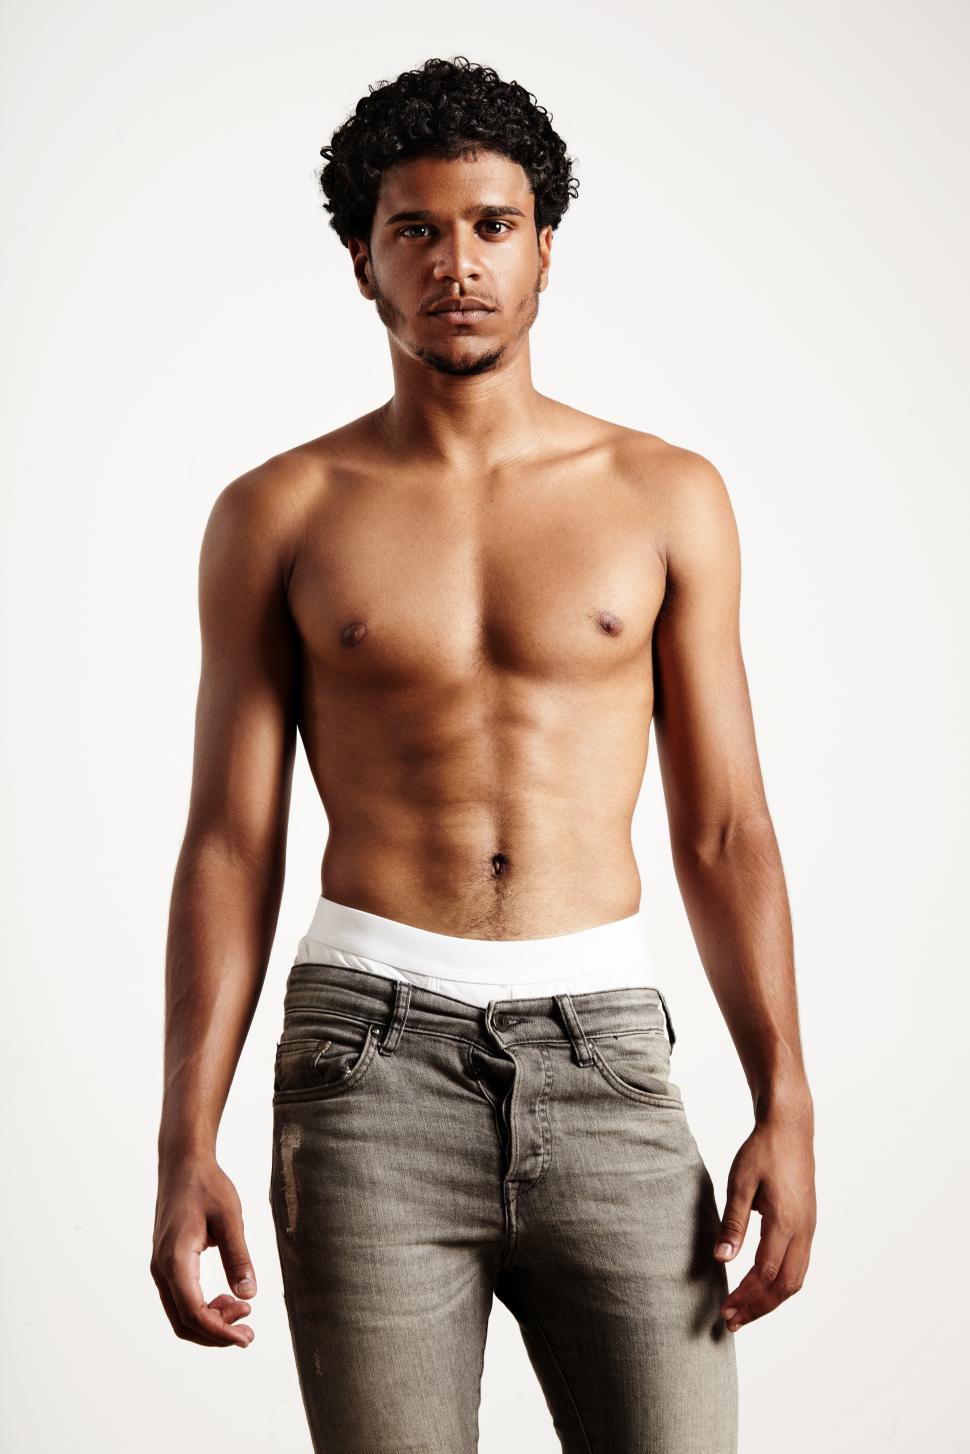 Free Image of young man wearing jeans, showing fit body. shirtless 